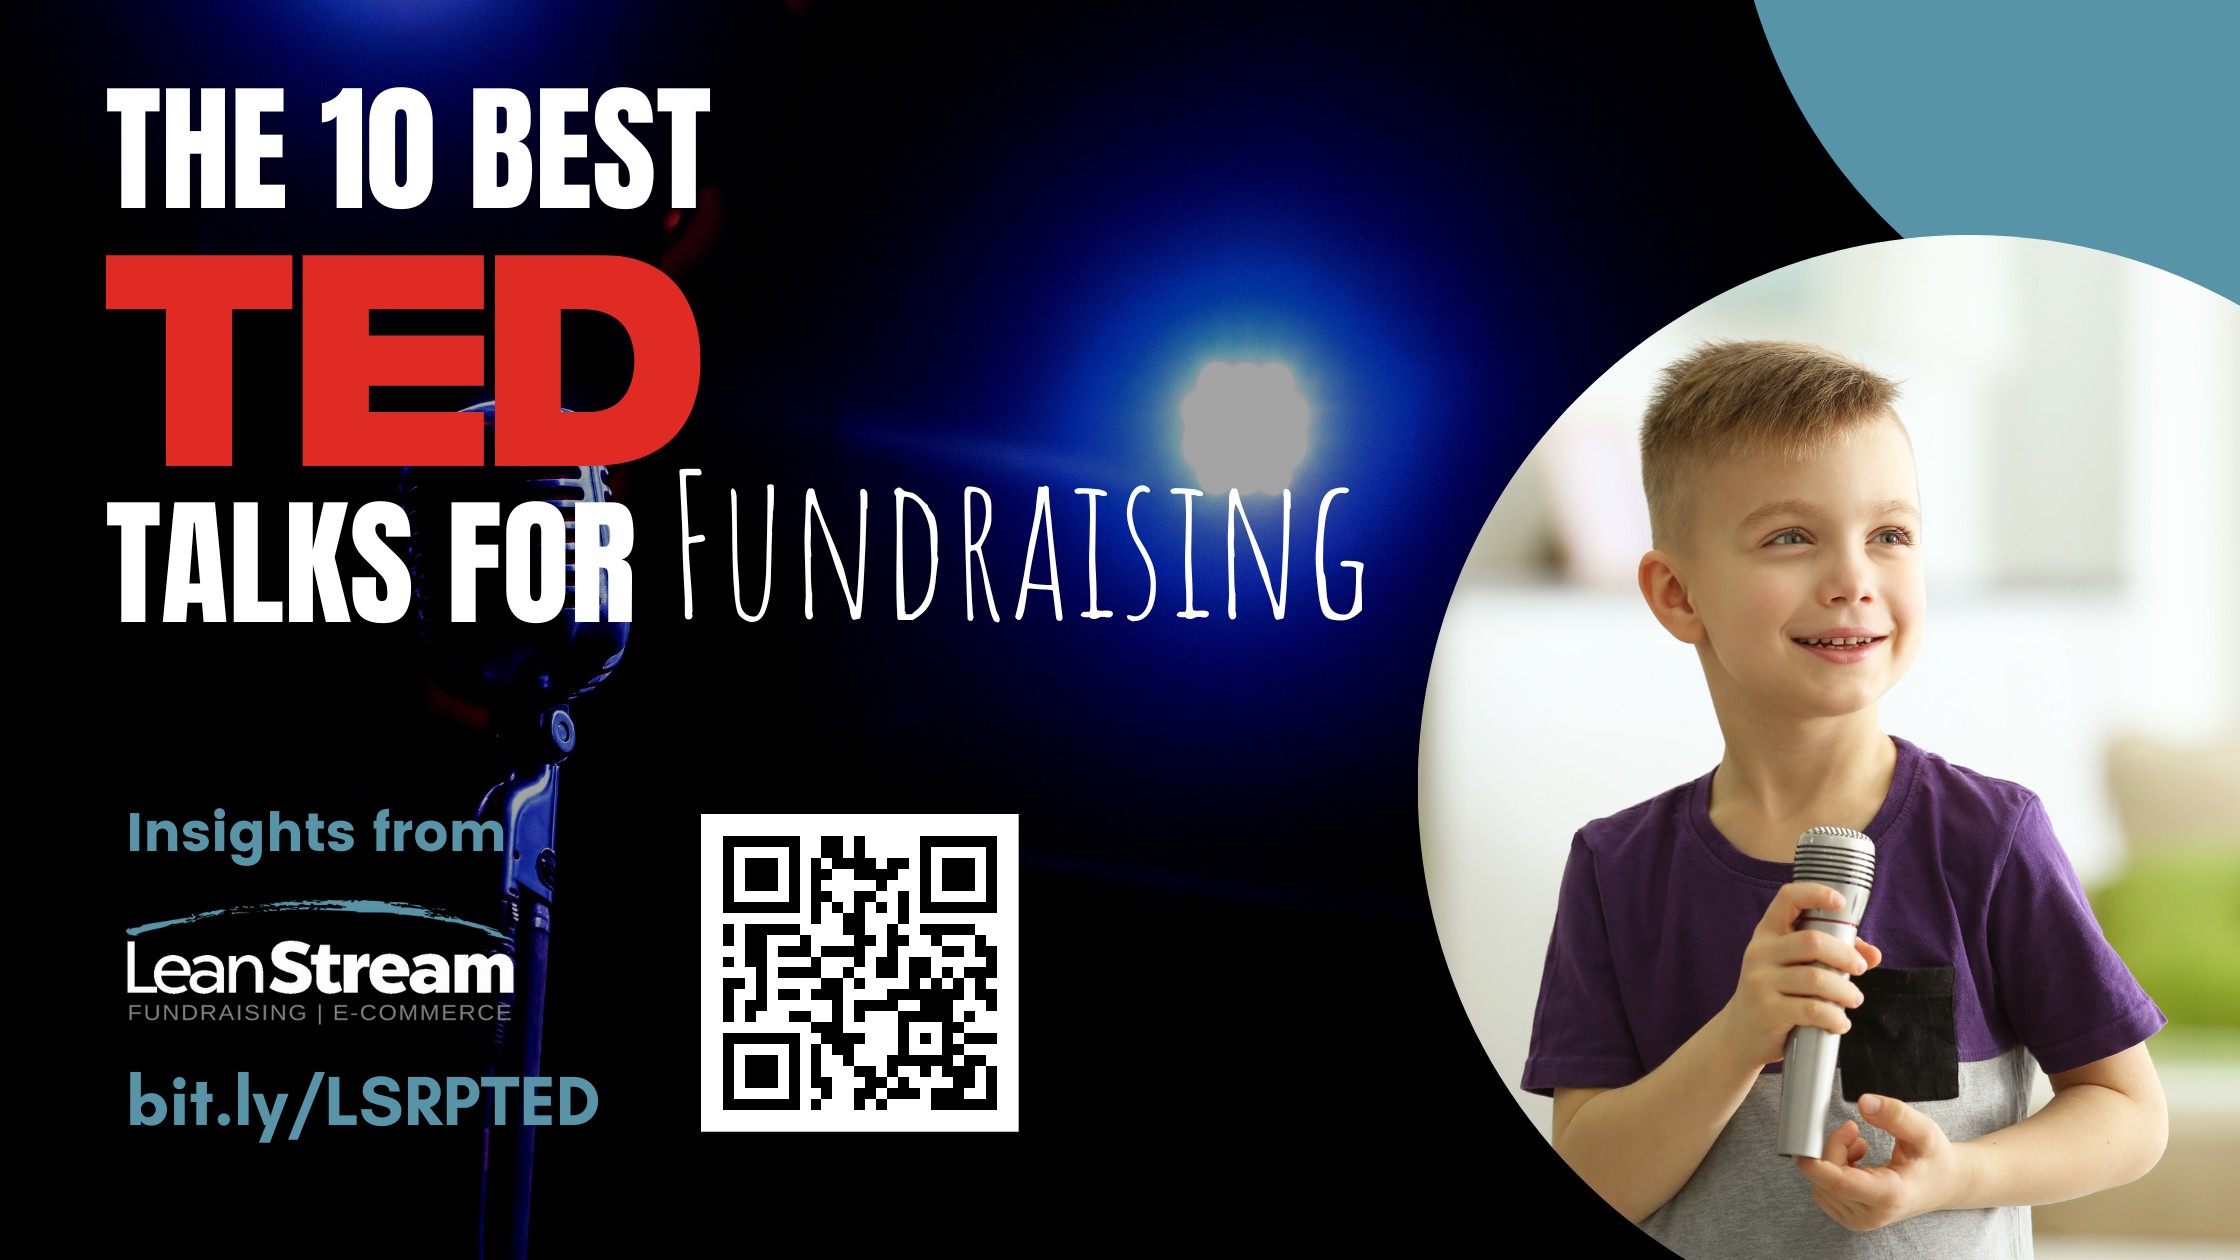 TED Talks about Fundraising